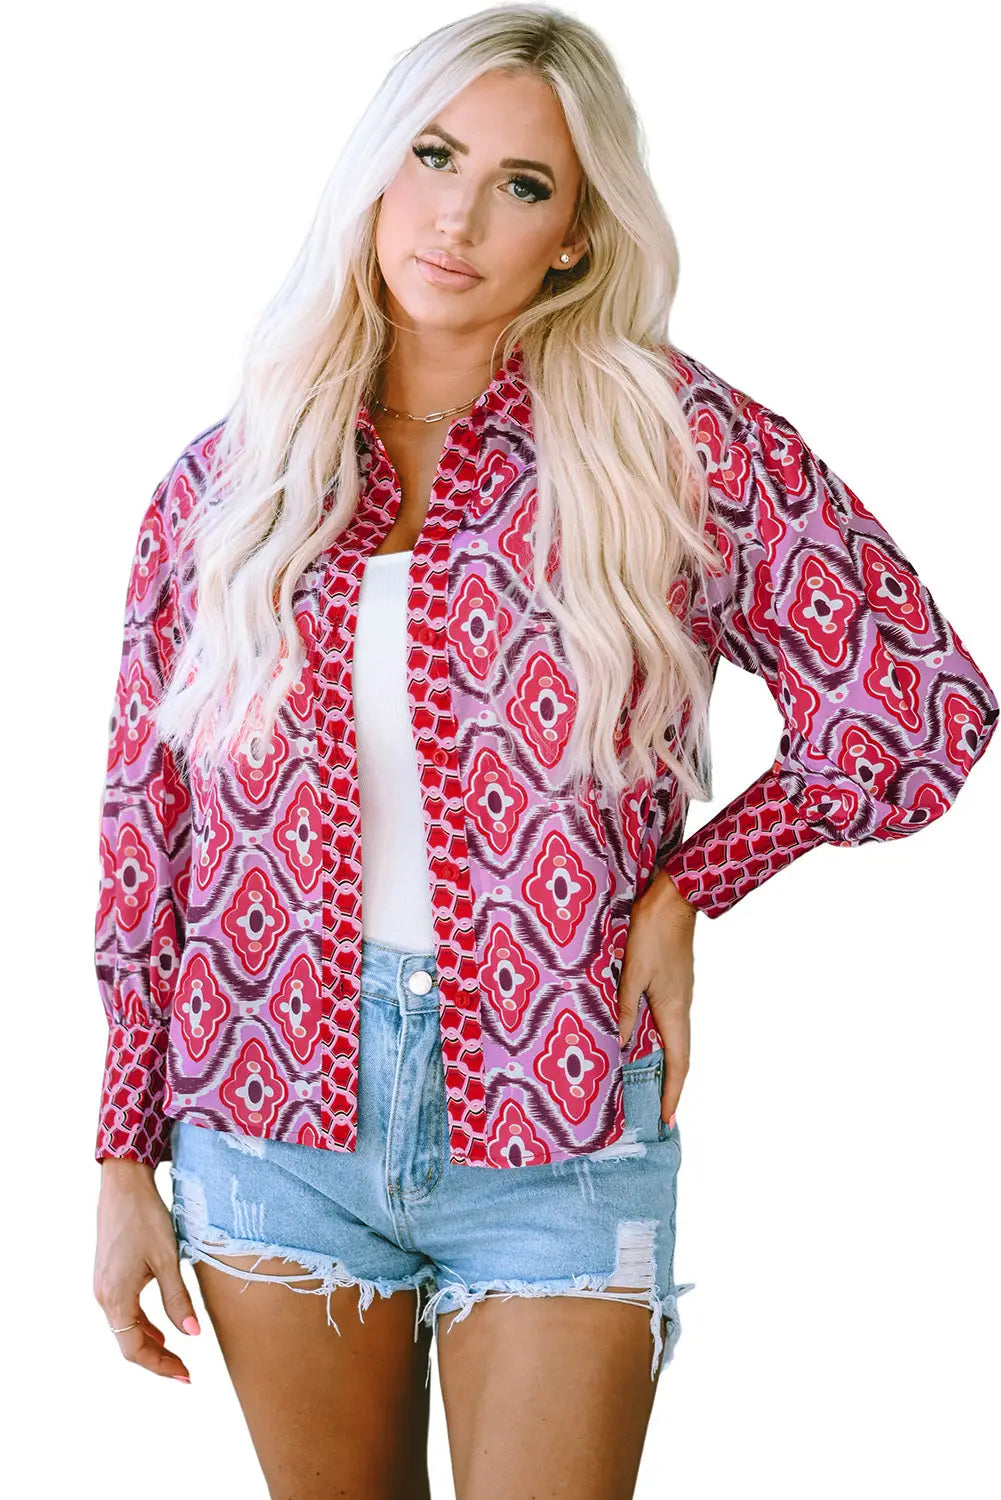 Rose abstract print button up long sleeve shirt - tops